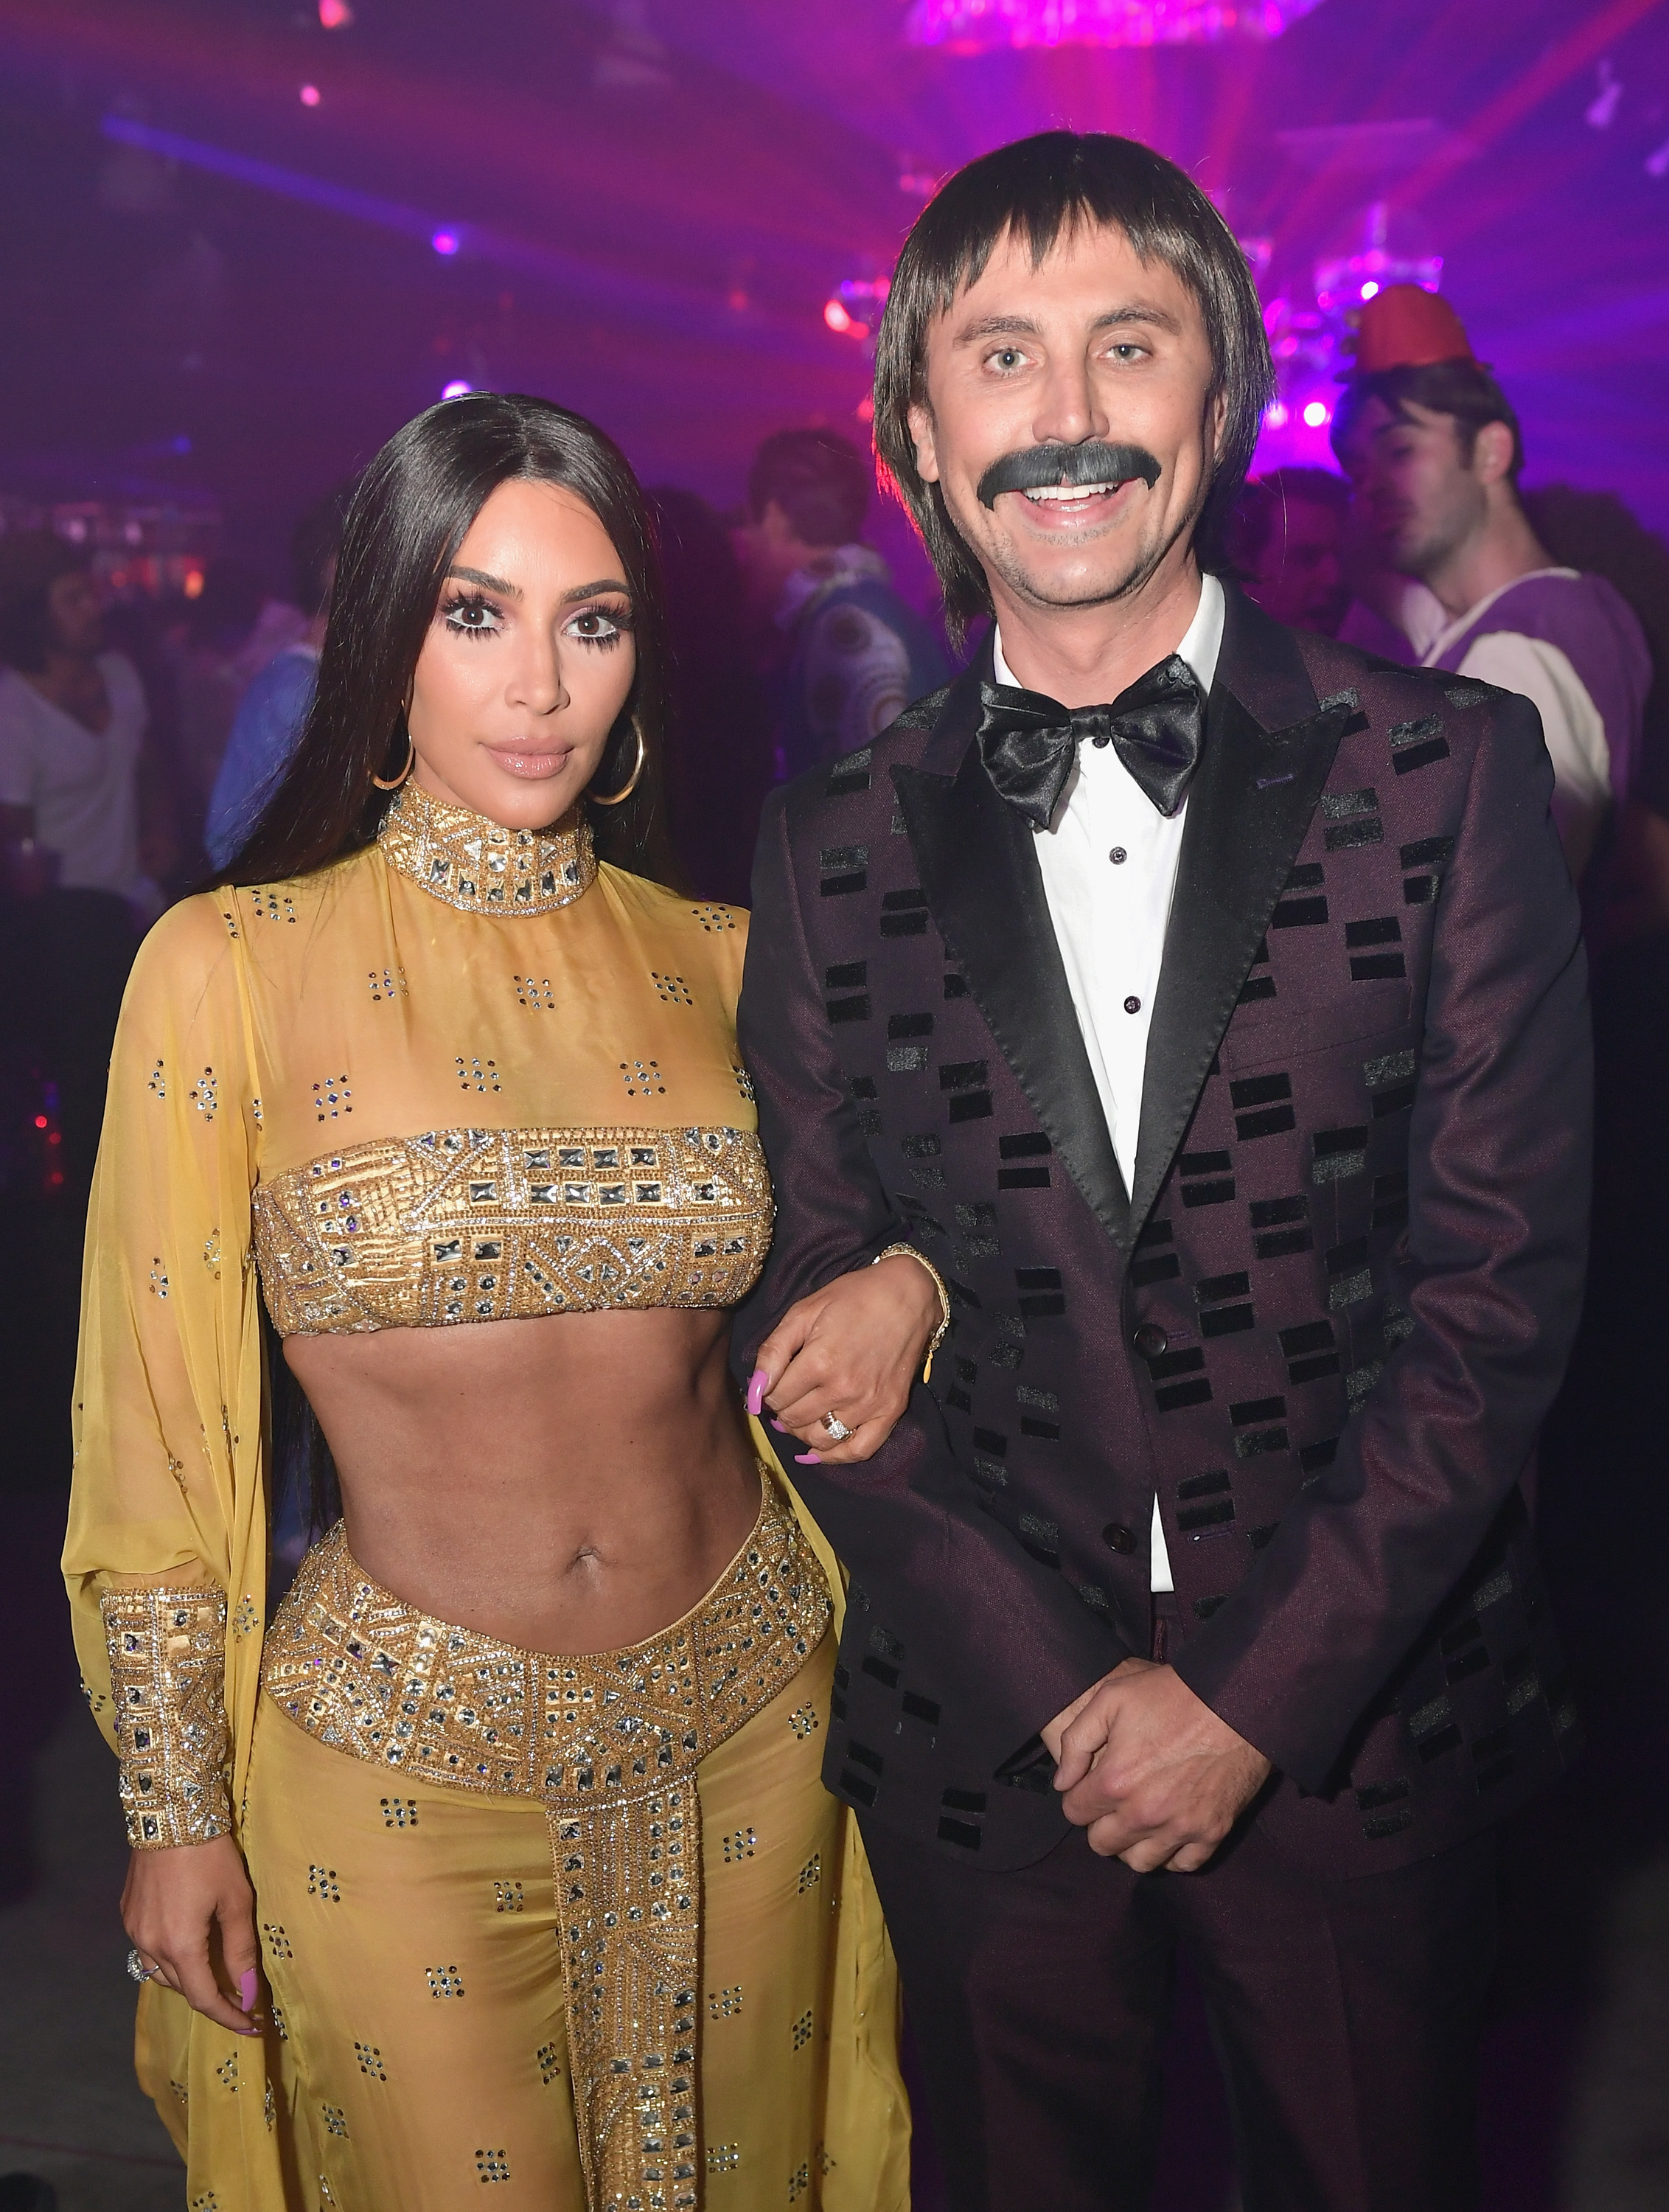 Kim Kardashian and Jonathan Cheban attend Casamigos Halloween party on October 27, 2017 in Los Angeles, California. | Source: Getty Images